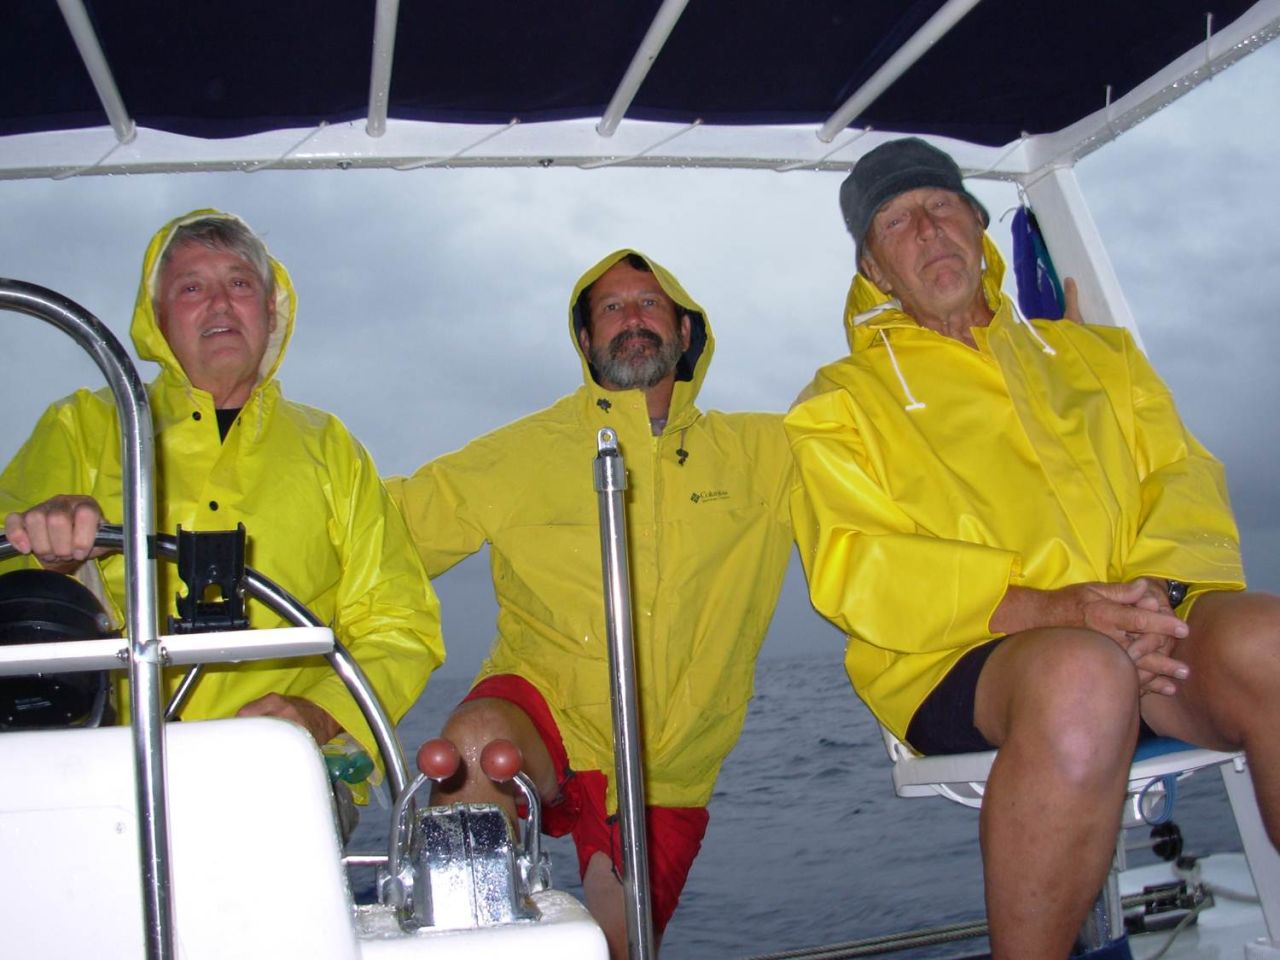 Cultra, left, recruited friends Leo Sherman, center, and Joe Strykowski to set sail for an around-the-world journey.